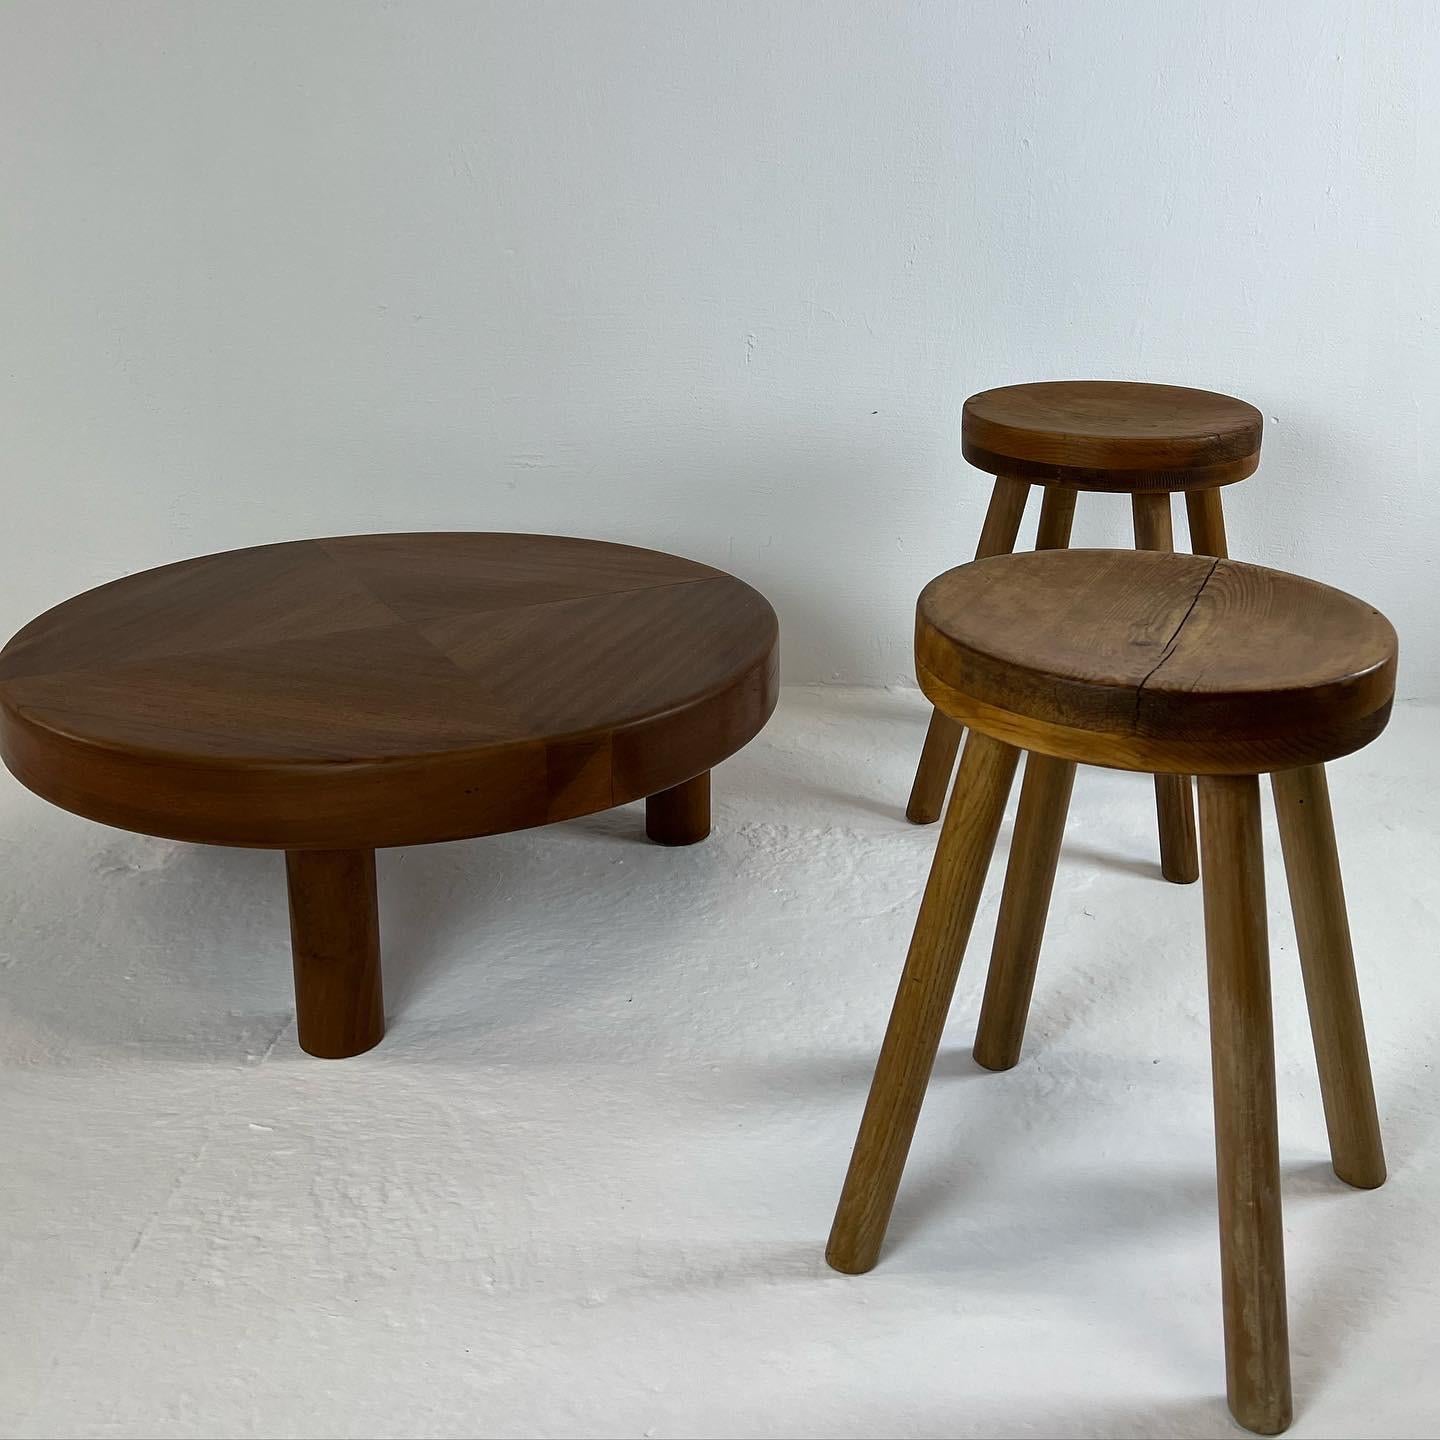 Superb pair of slightly concave modernist stools, in pine, from the 1950s. With 4 legs and superb craftsmanship, they evoke the creations of charlotte perriand. They will fit perfectly into a mid-century decoration.